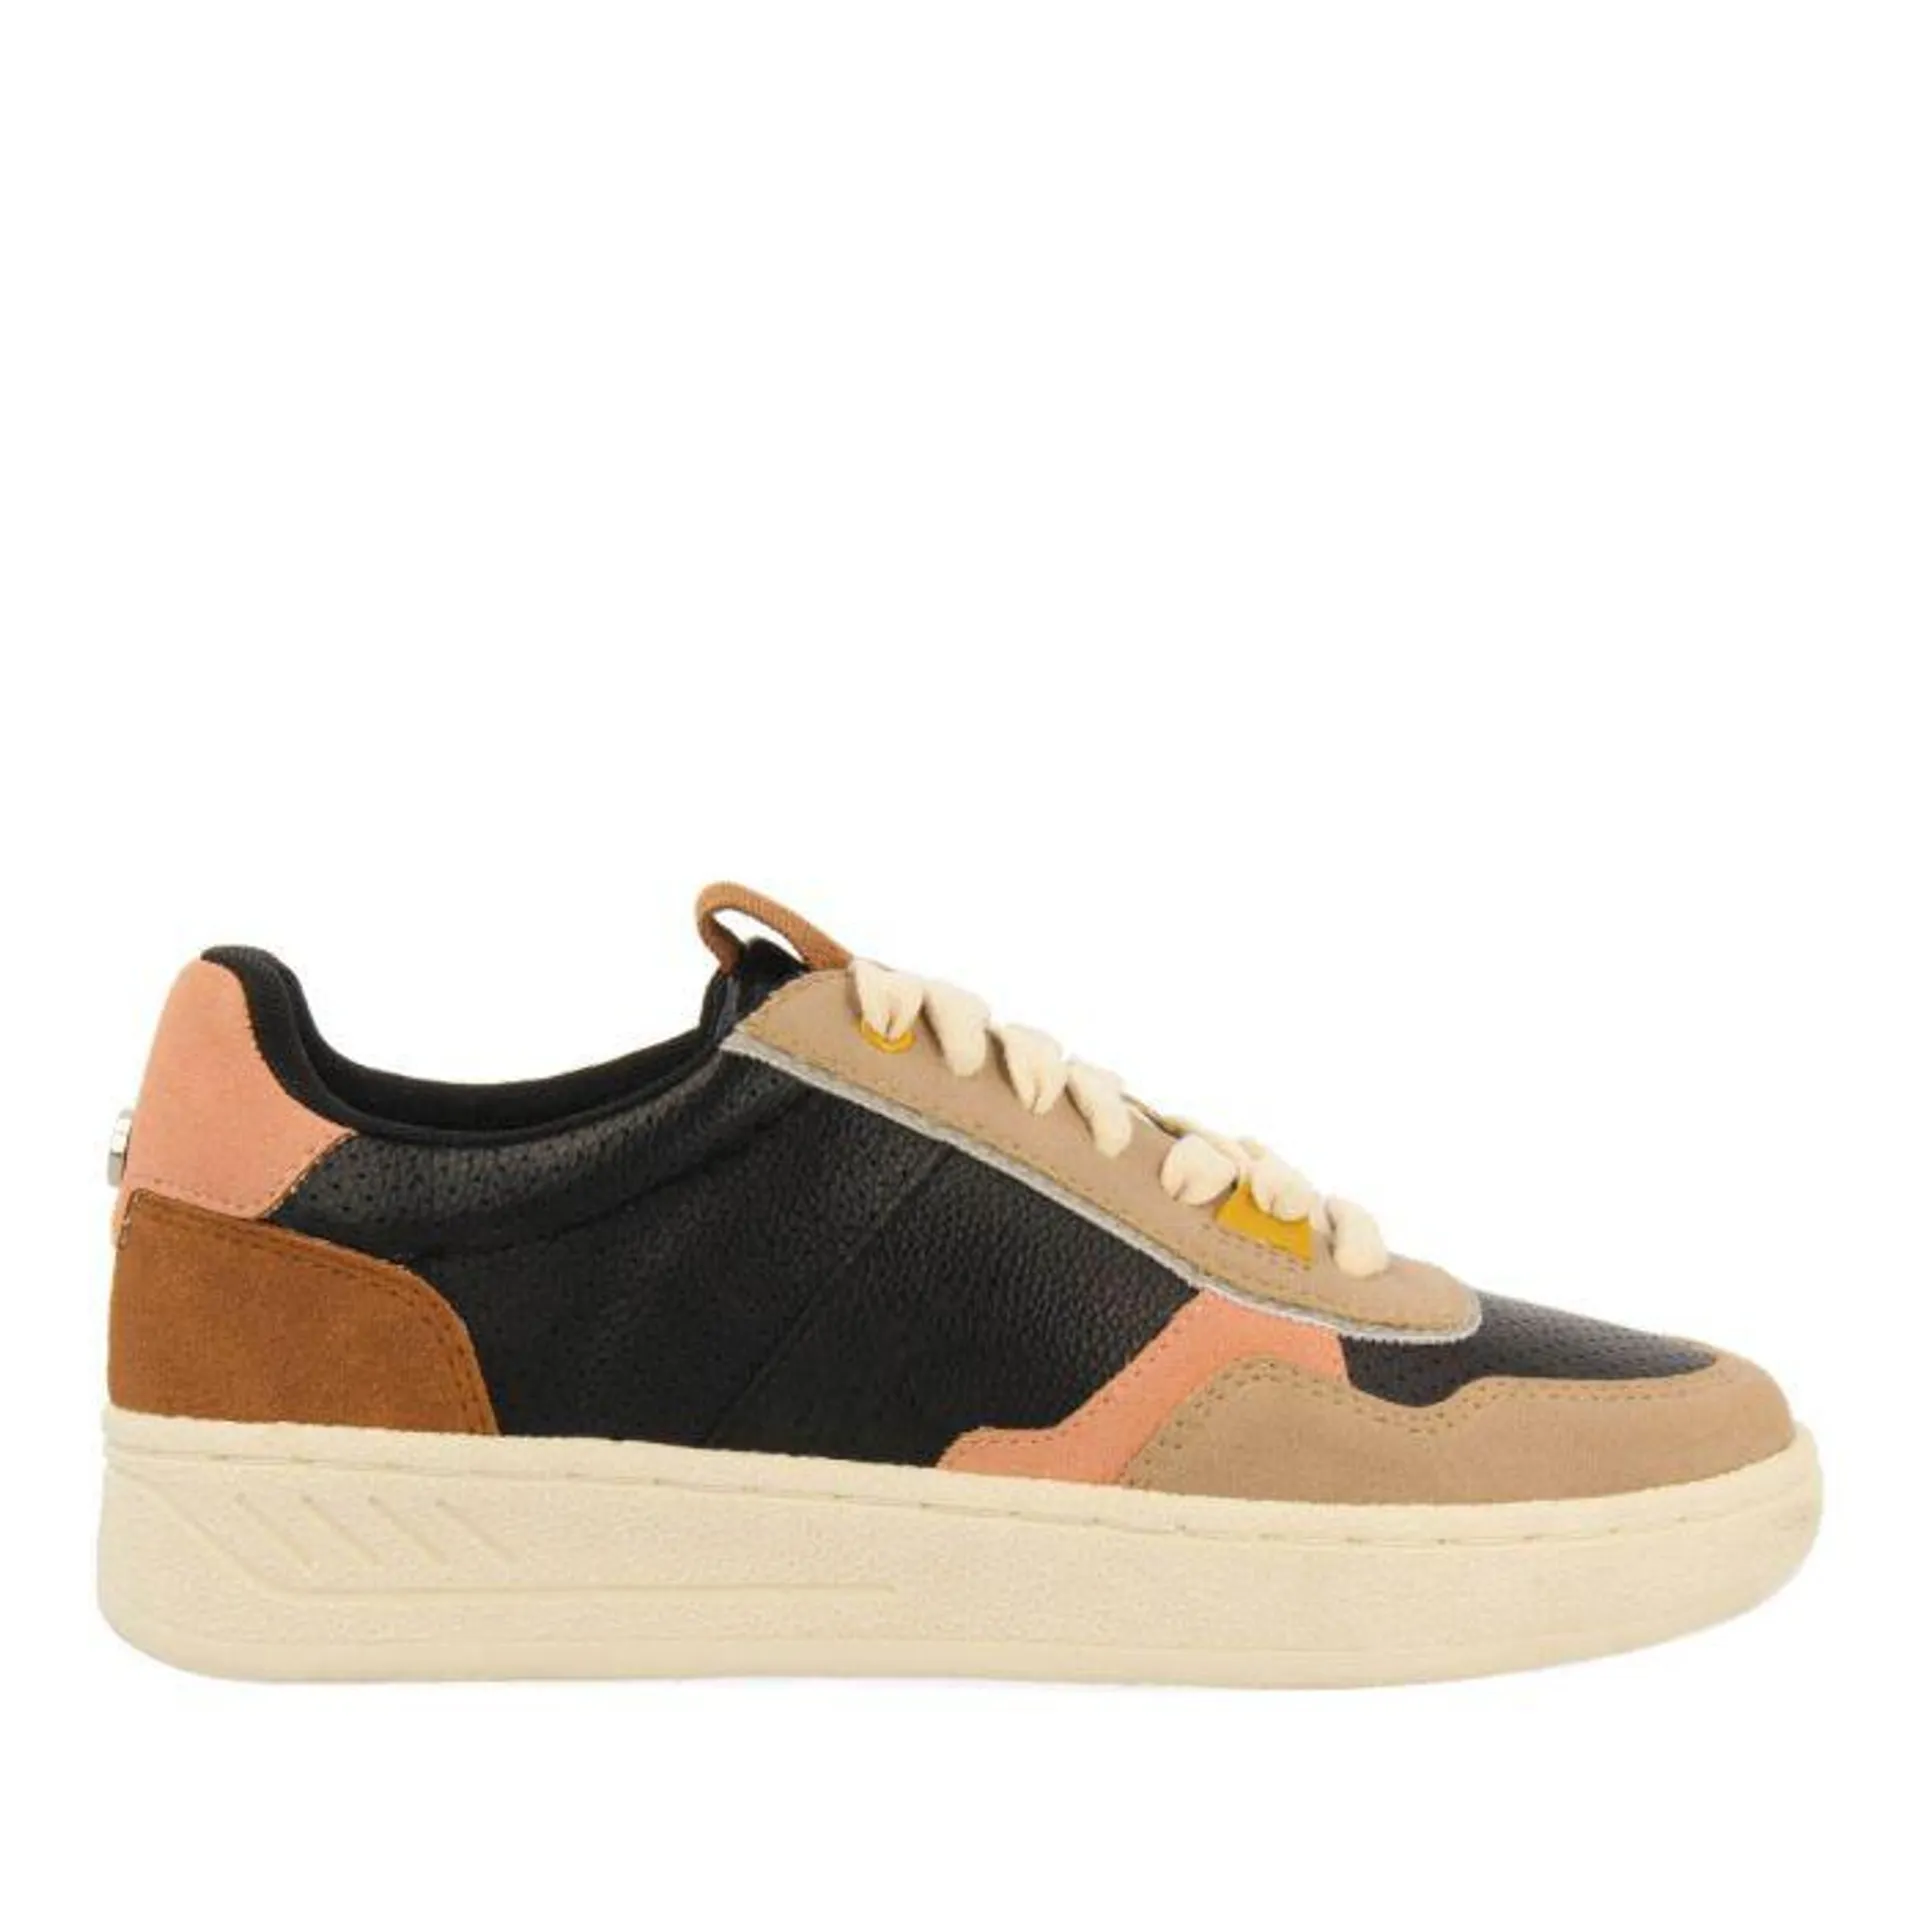 Beresford women's black retro sneakers with pastel colours